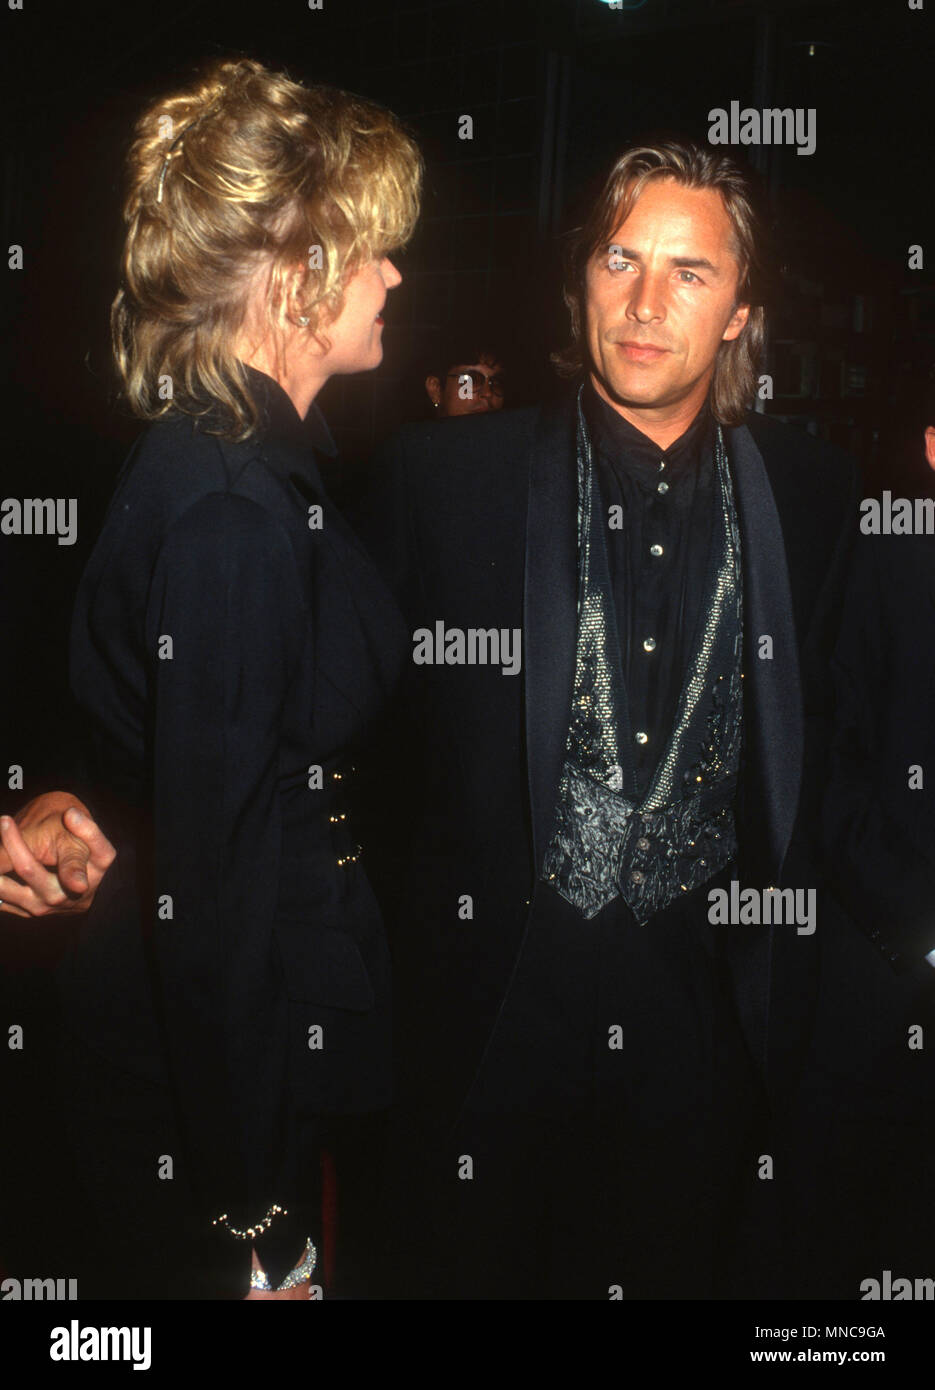 LOS ANGELES, CA - SEPTEMBER 7: (L-R) Actress Melanie Griffith and actor Don Johnson attend Fourth Annual APLA Commitment to Life Benefit on September 7, 1990 at the Wiltern Theater in Los Angeles, California. Photo by Barry King/Alamy Stock Photo Stock Photo